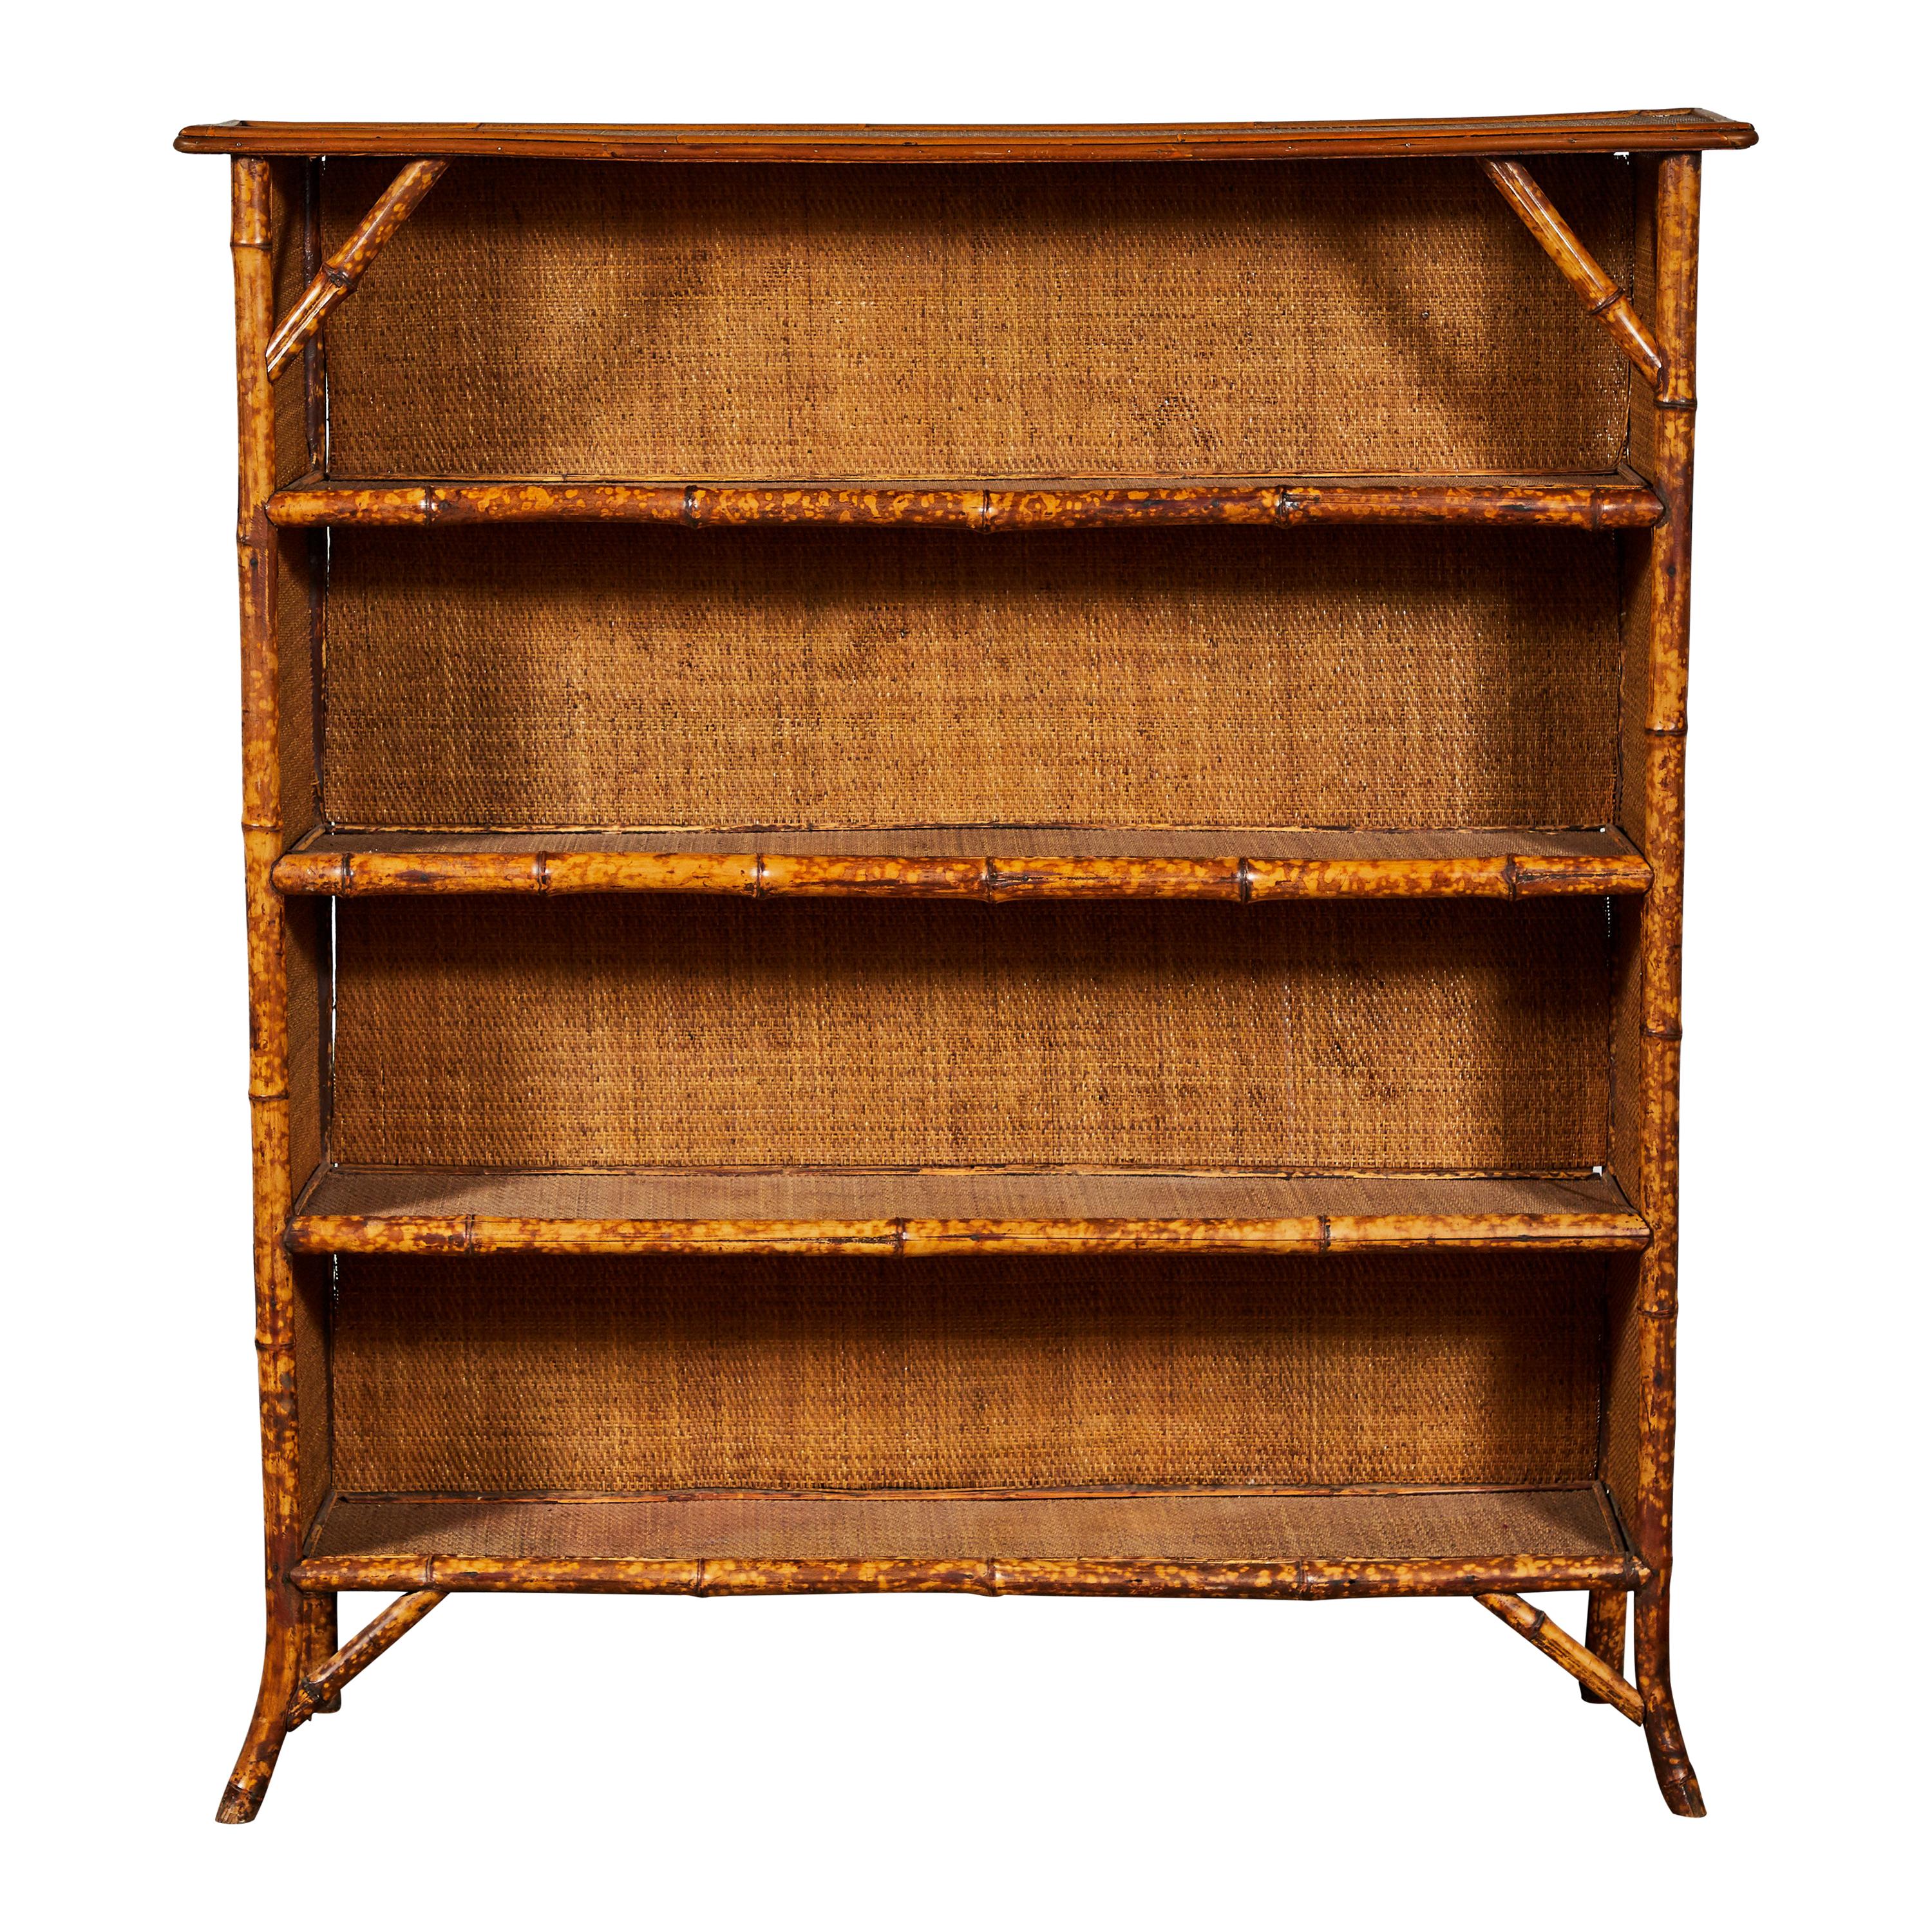 Vintage Bamboo Shelf with Woven Frame